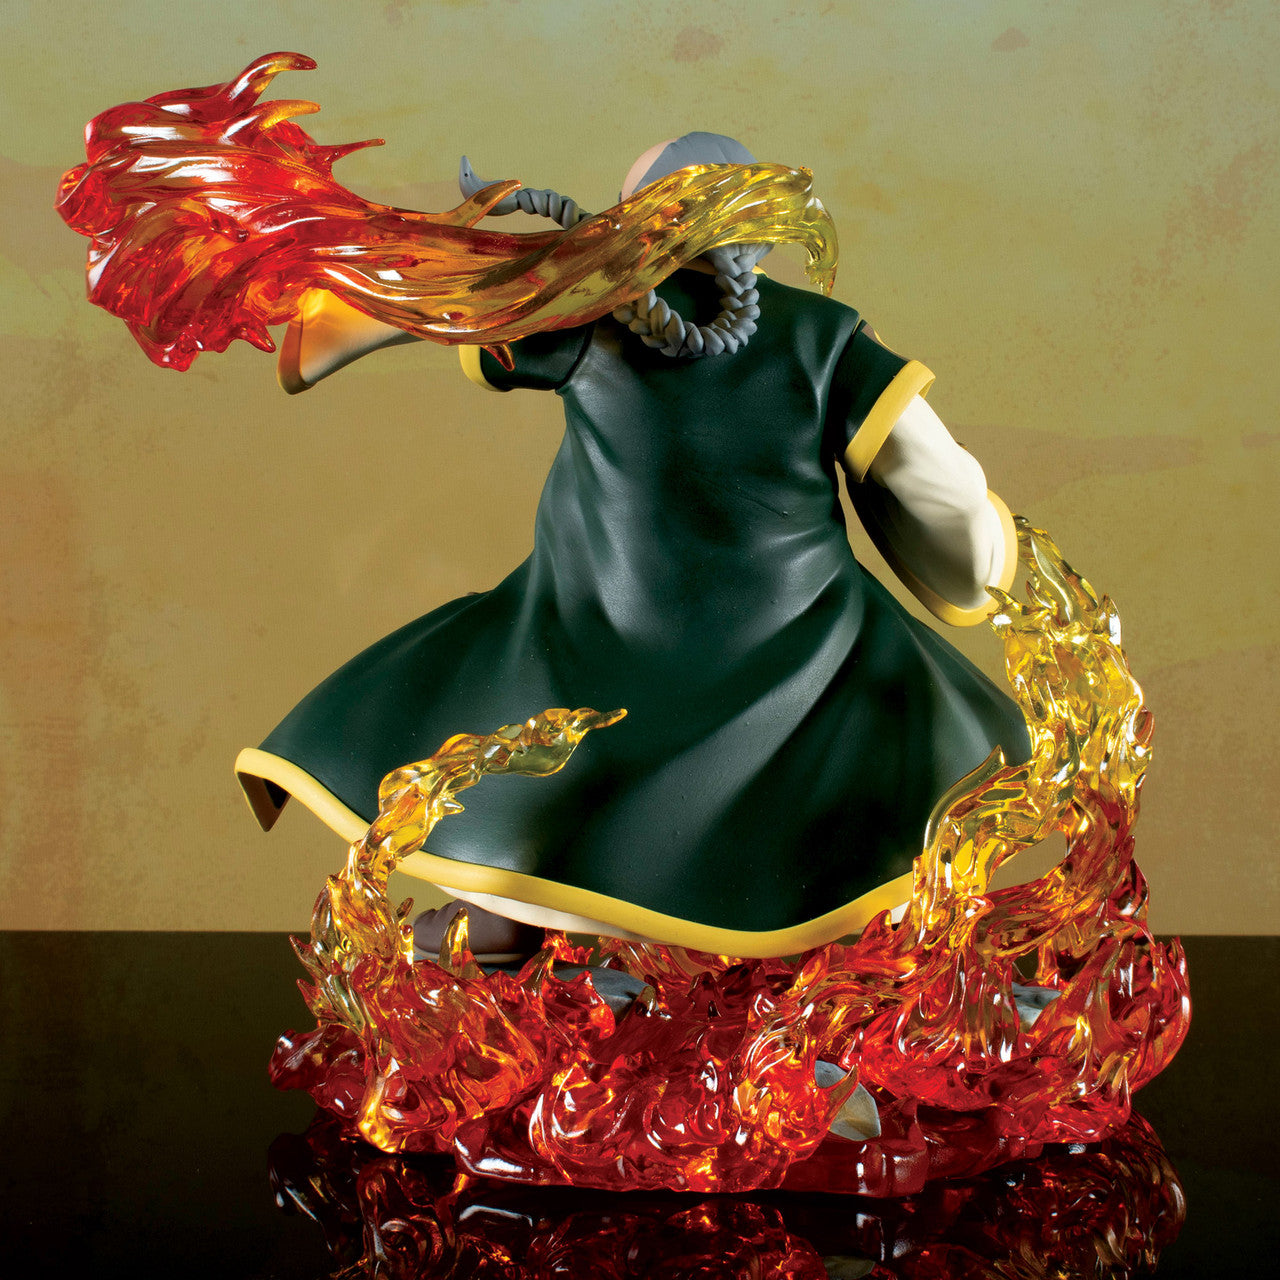 [LIMITED PO] Diamond Select Toys - Avatar: The Last Airbender - Uncle Iroh Gallery Diorama - Marvelous Toys